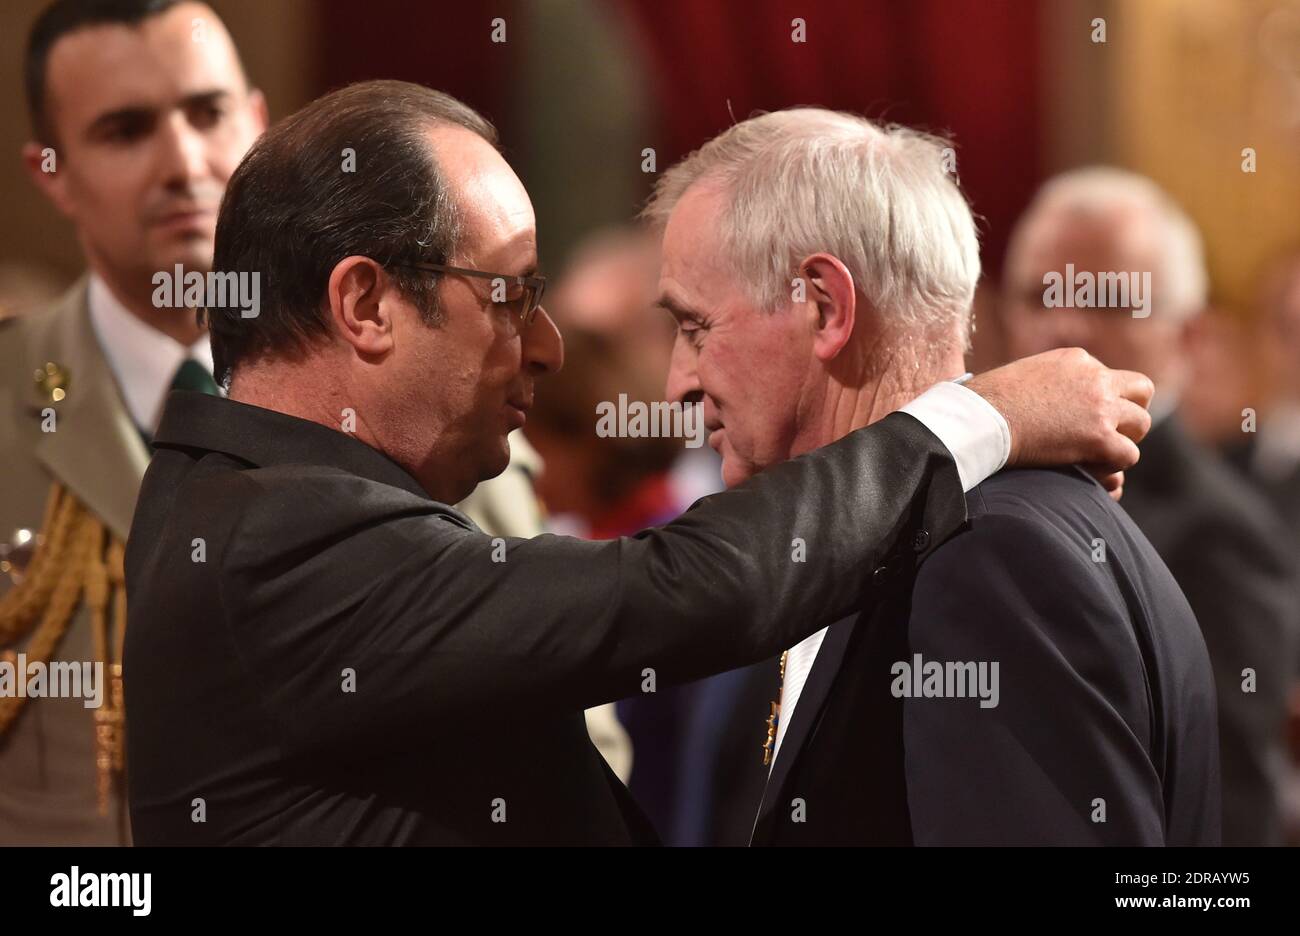 French President Francois Hollande awards French climatologist Jean Jouzel during a ceremony to award personalities devoted to climate issues and sustainable development, at the Elysee Palace in Paris, France on December 9, 2015. Photo by Christian Liewig/ABACAPRESS.COM Stock Photo